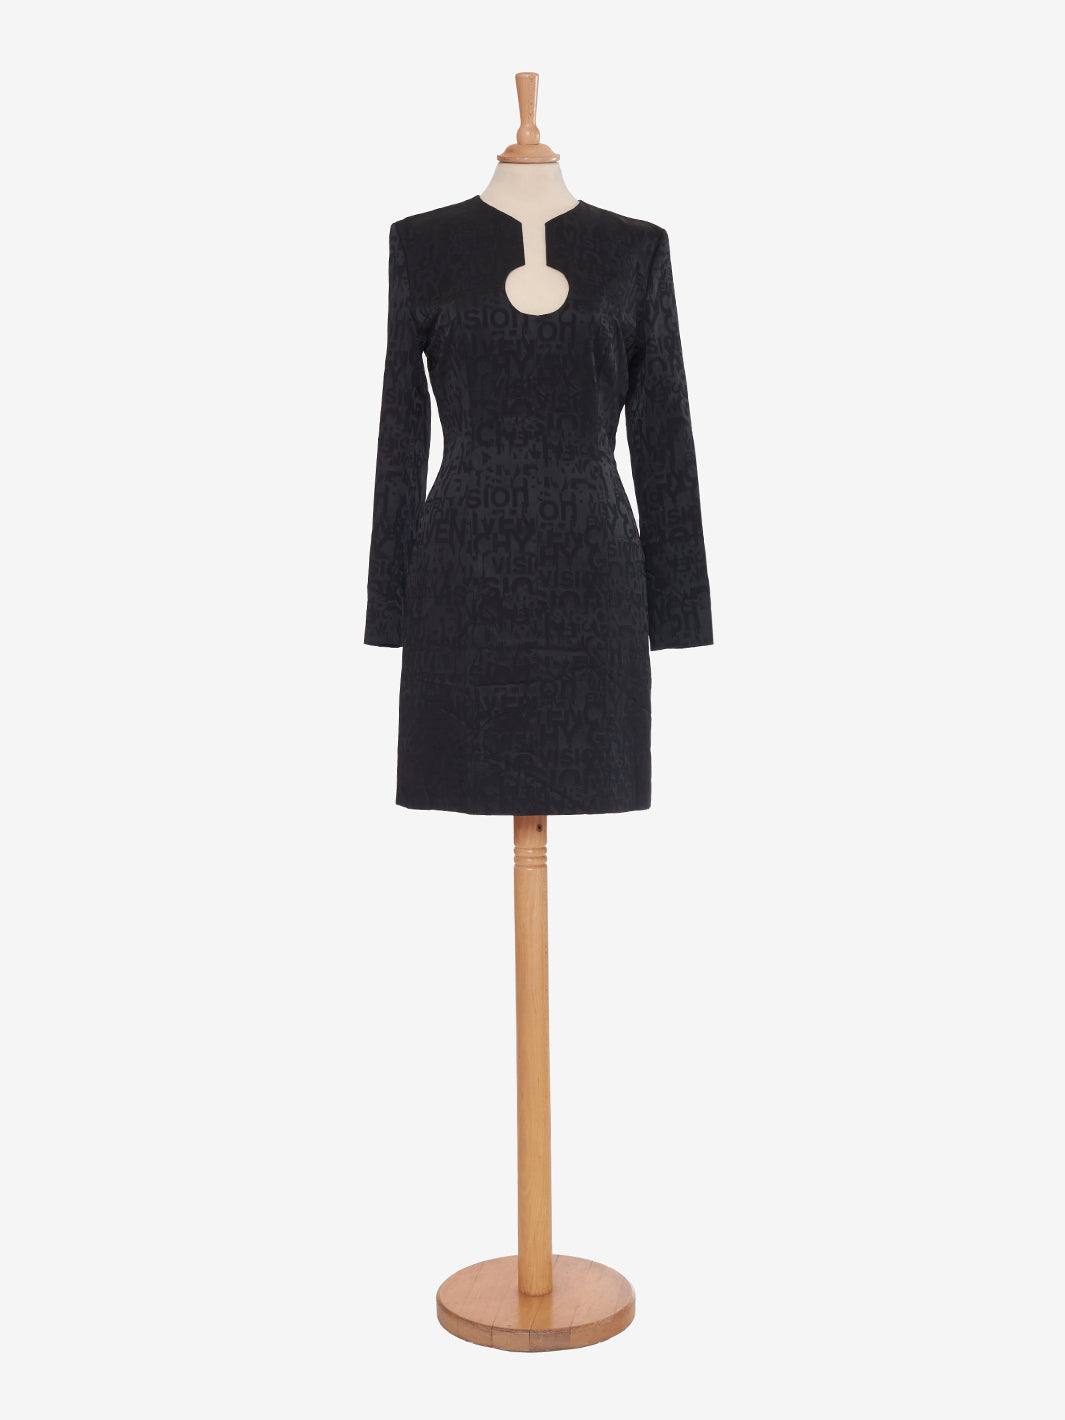 Givenchy Black sheath dress with letter print